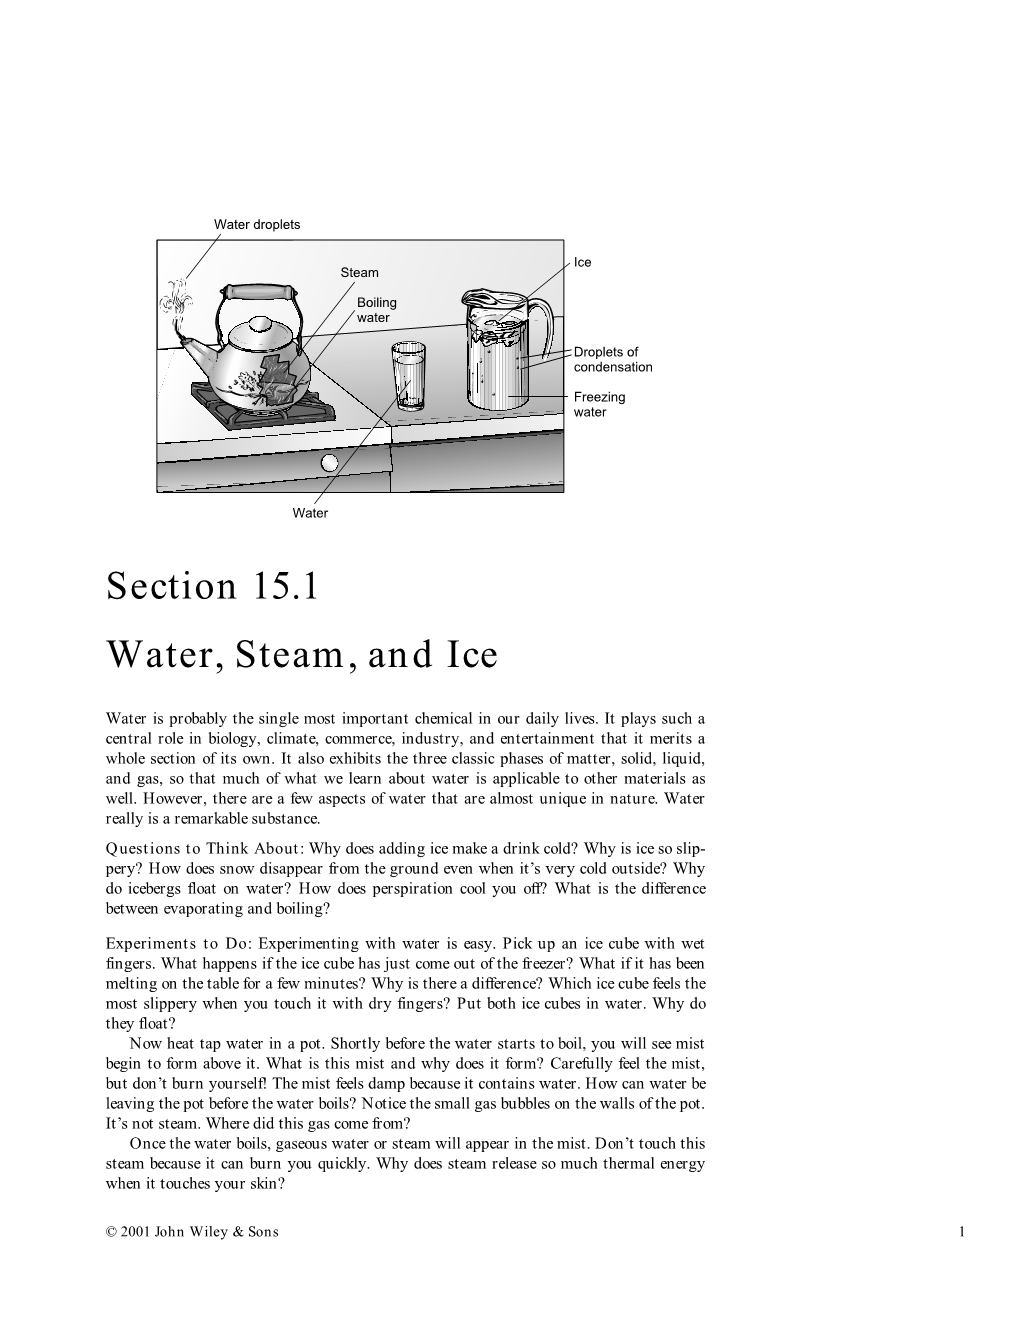 Section 15.1 Water, Steam, and Ice